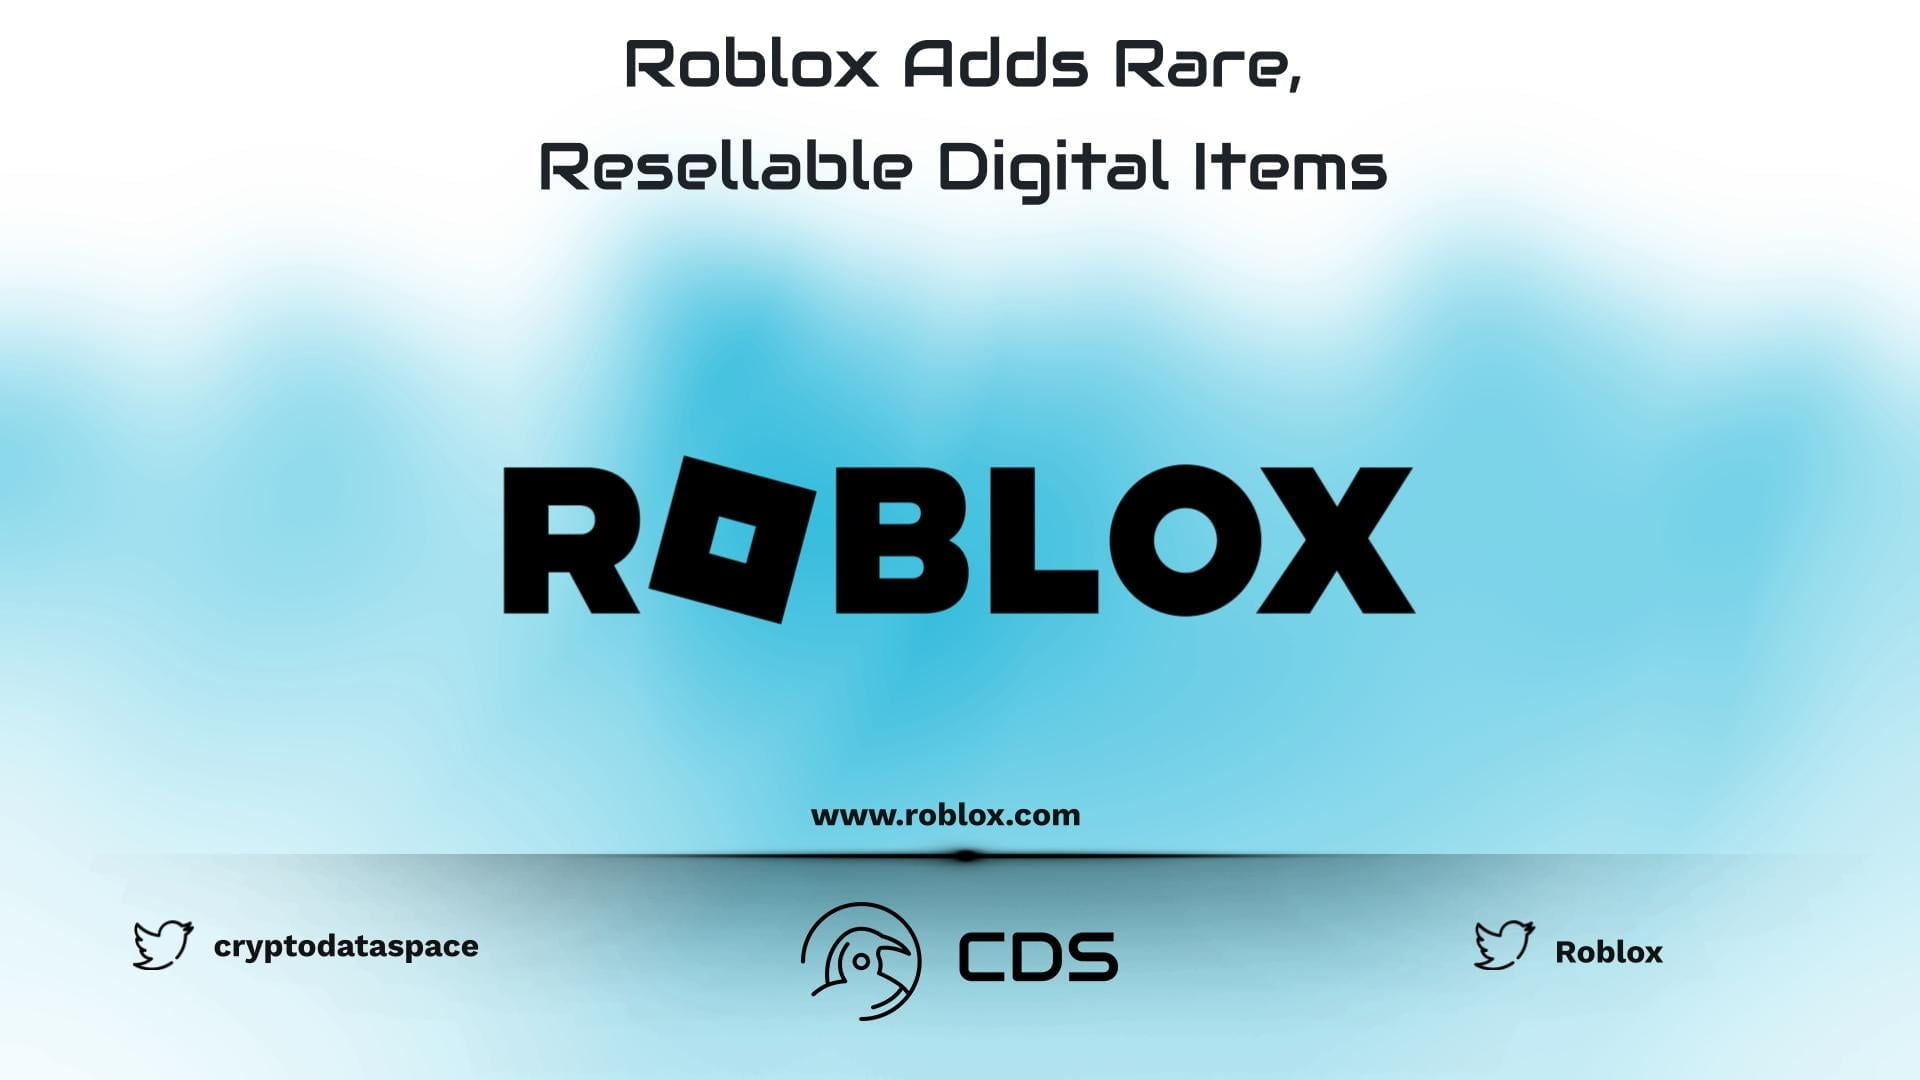 Roblox Adds Rare, Resellable Digital Items